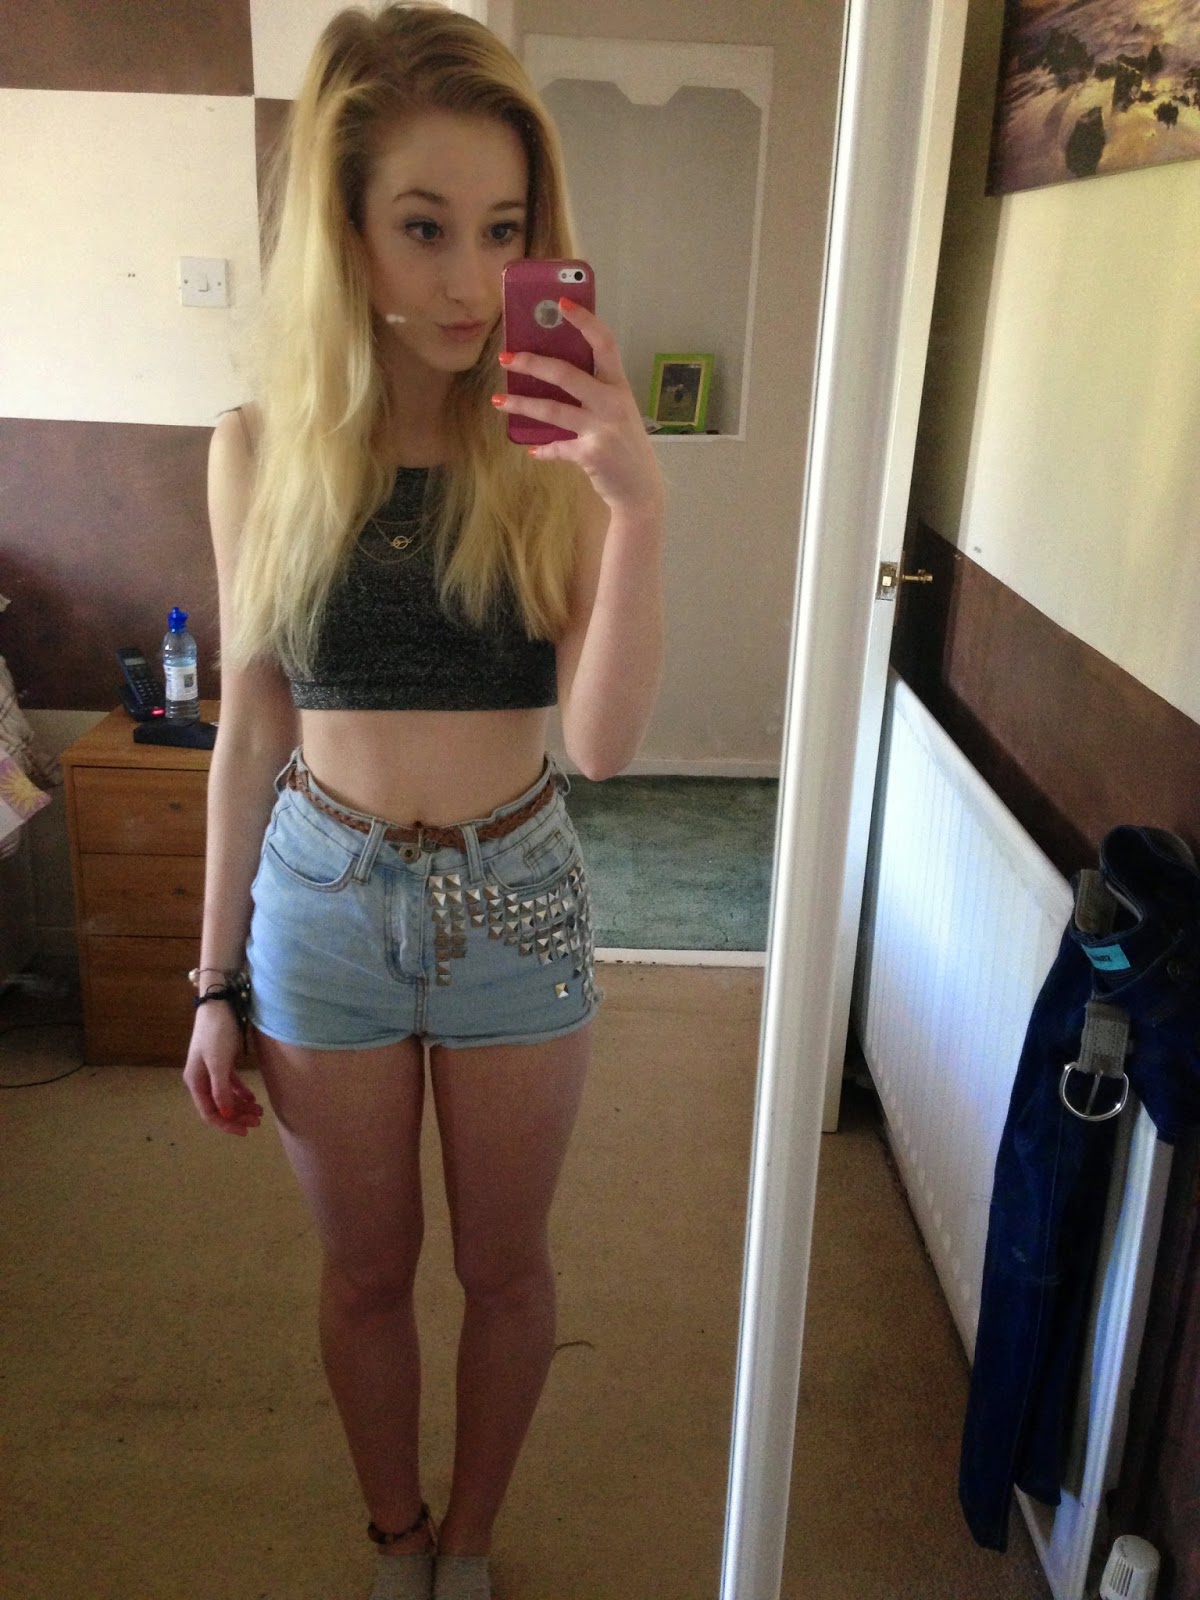 STYLESPICE: Anorexia Recovery: A Year On